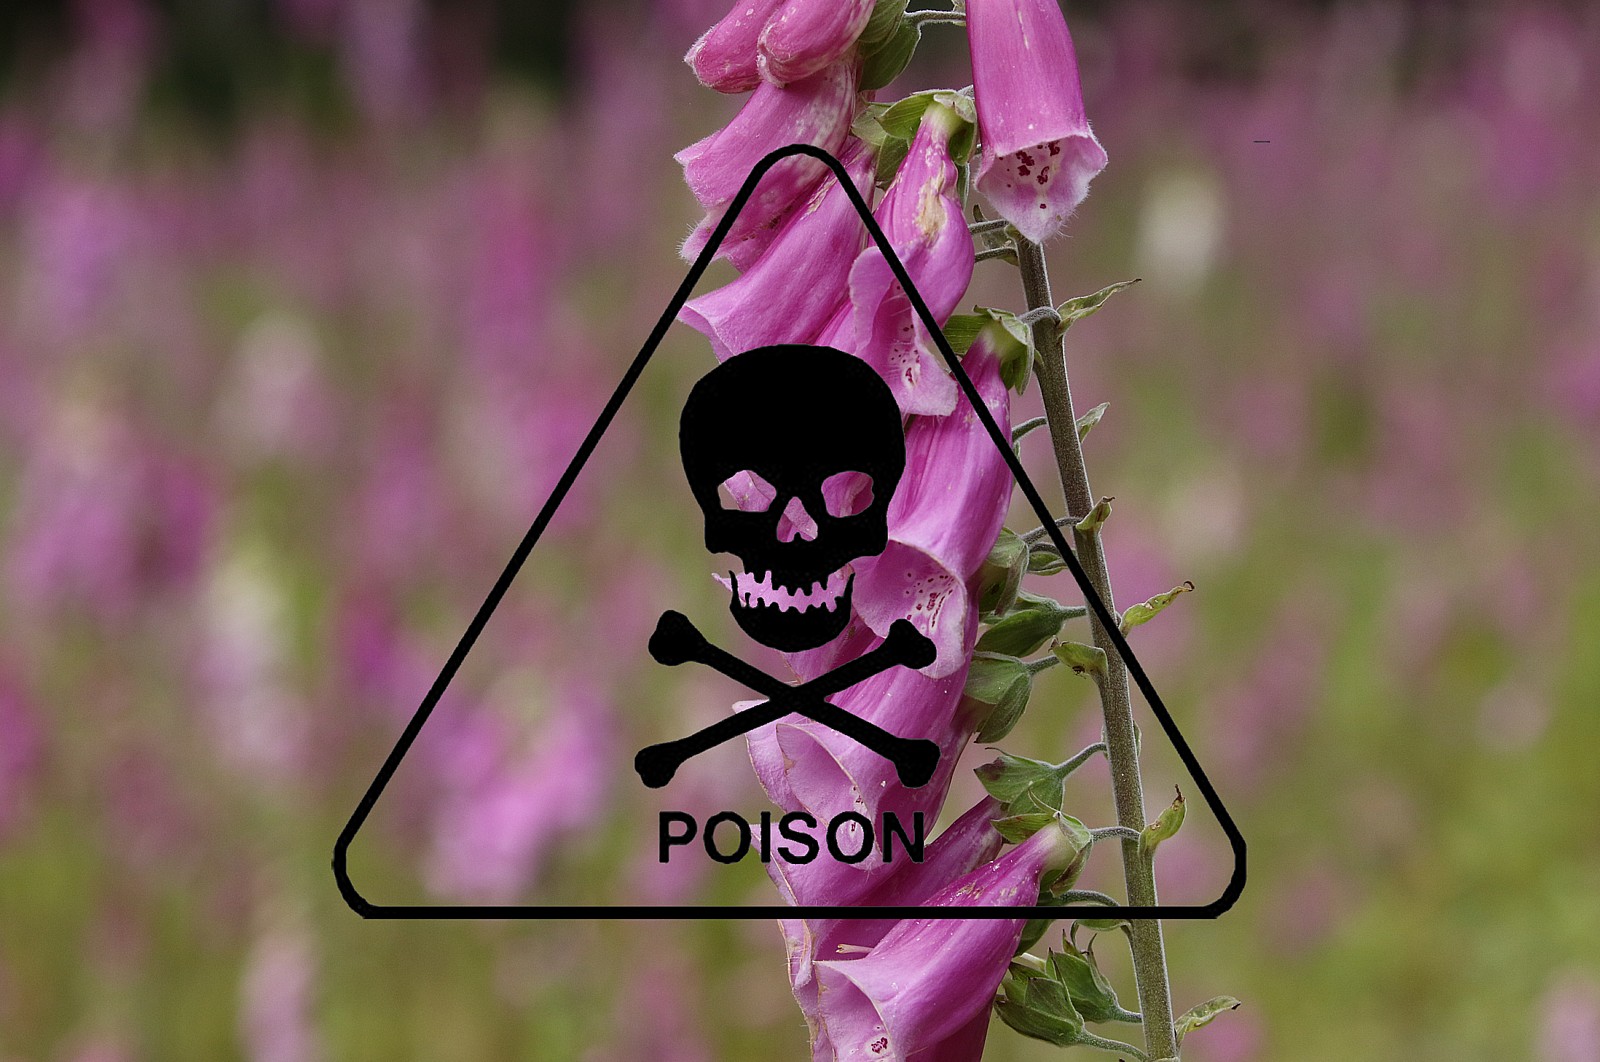 Foxglove is highly poisonous.